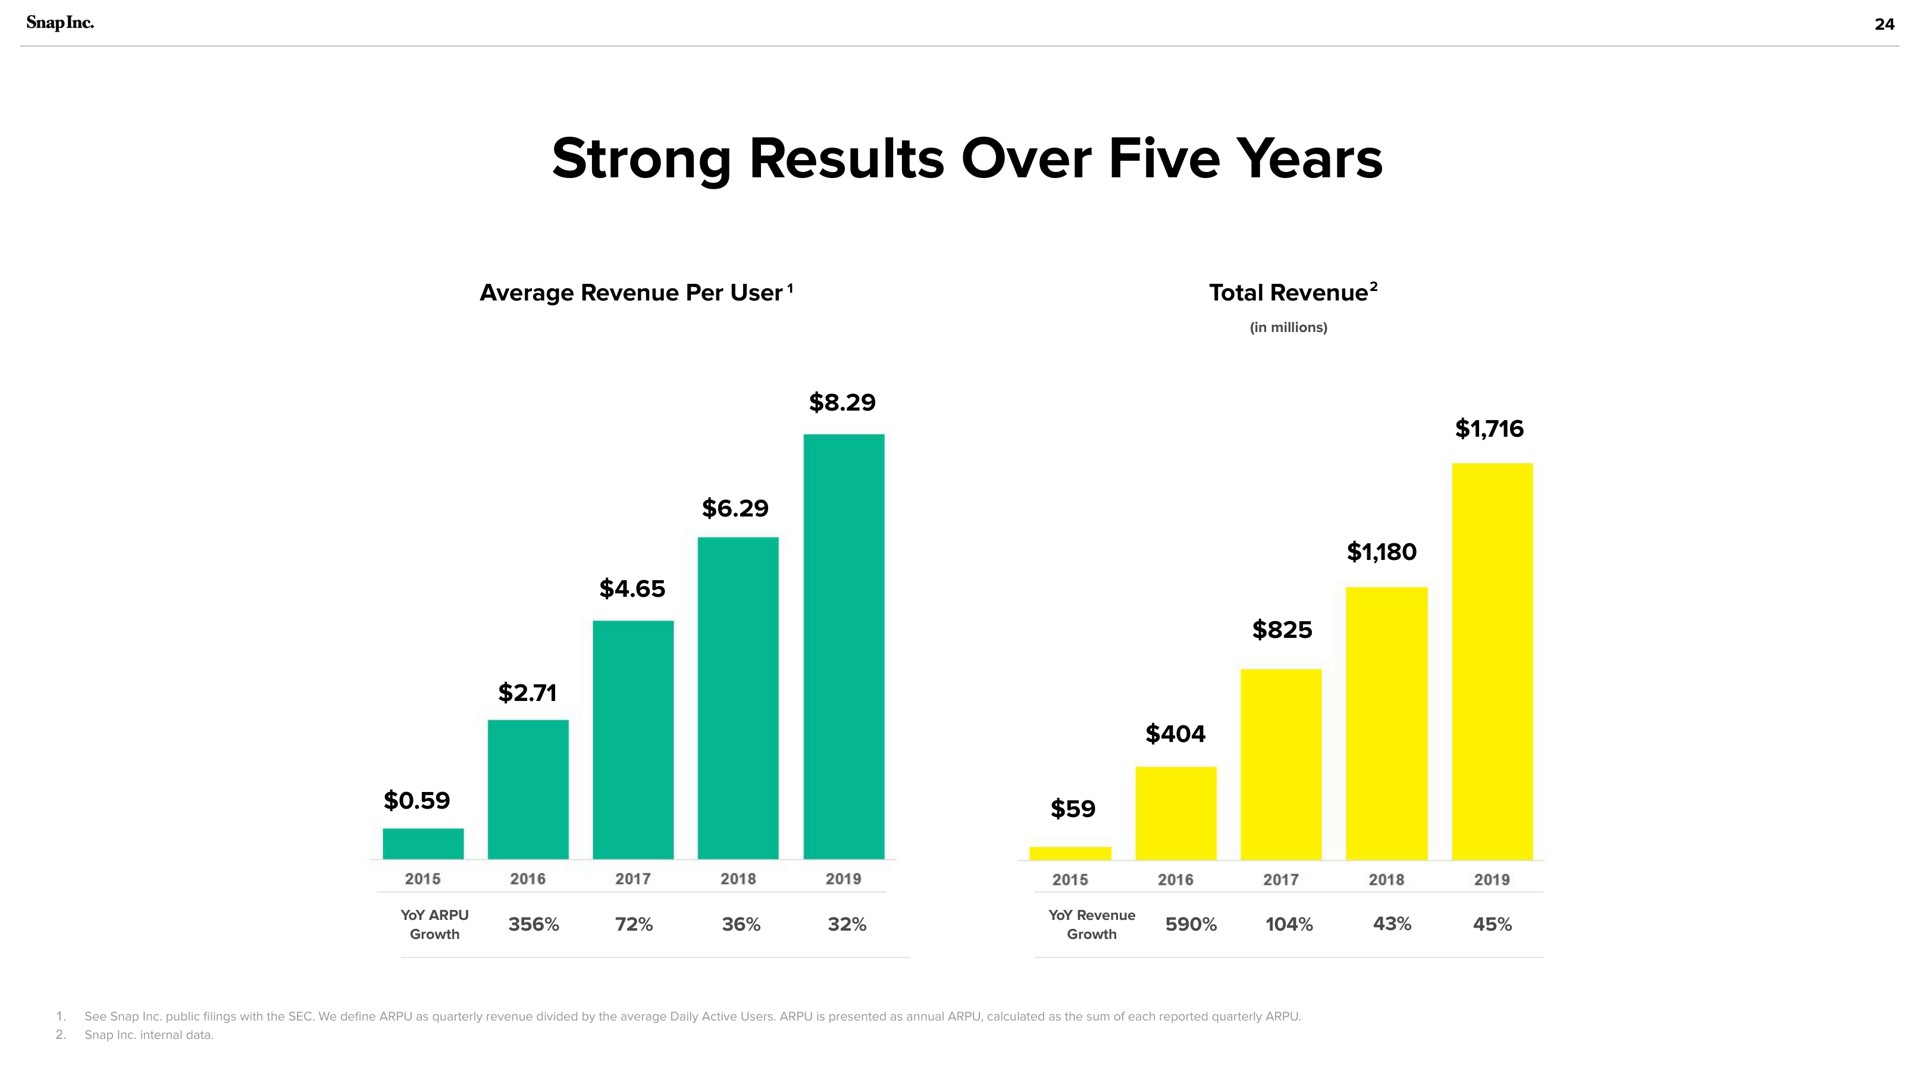 strong results over five years | Snap Inc